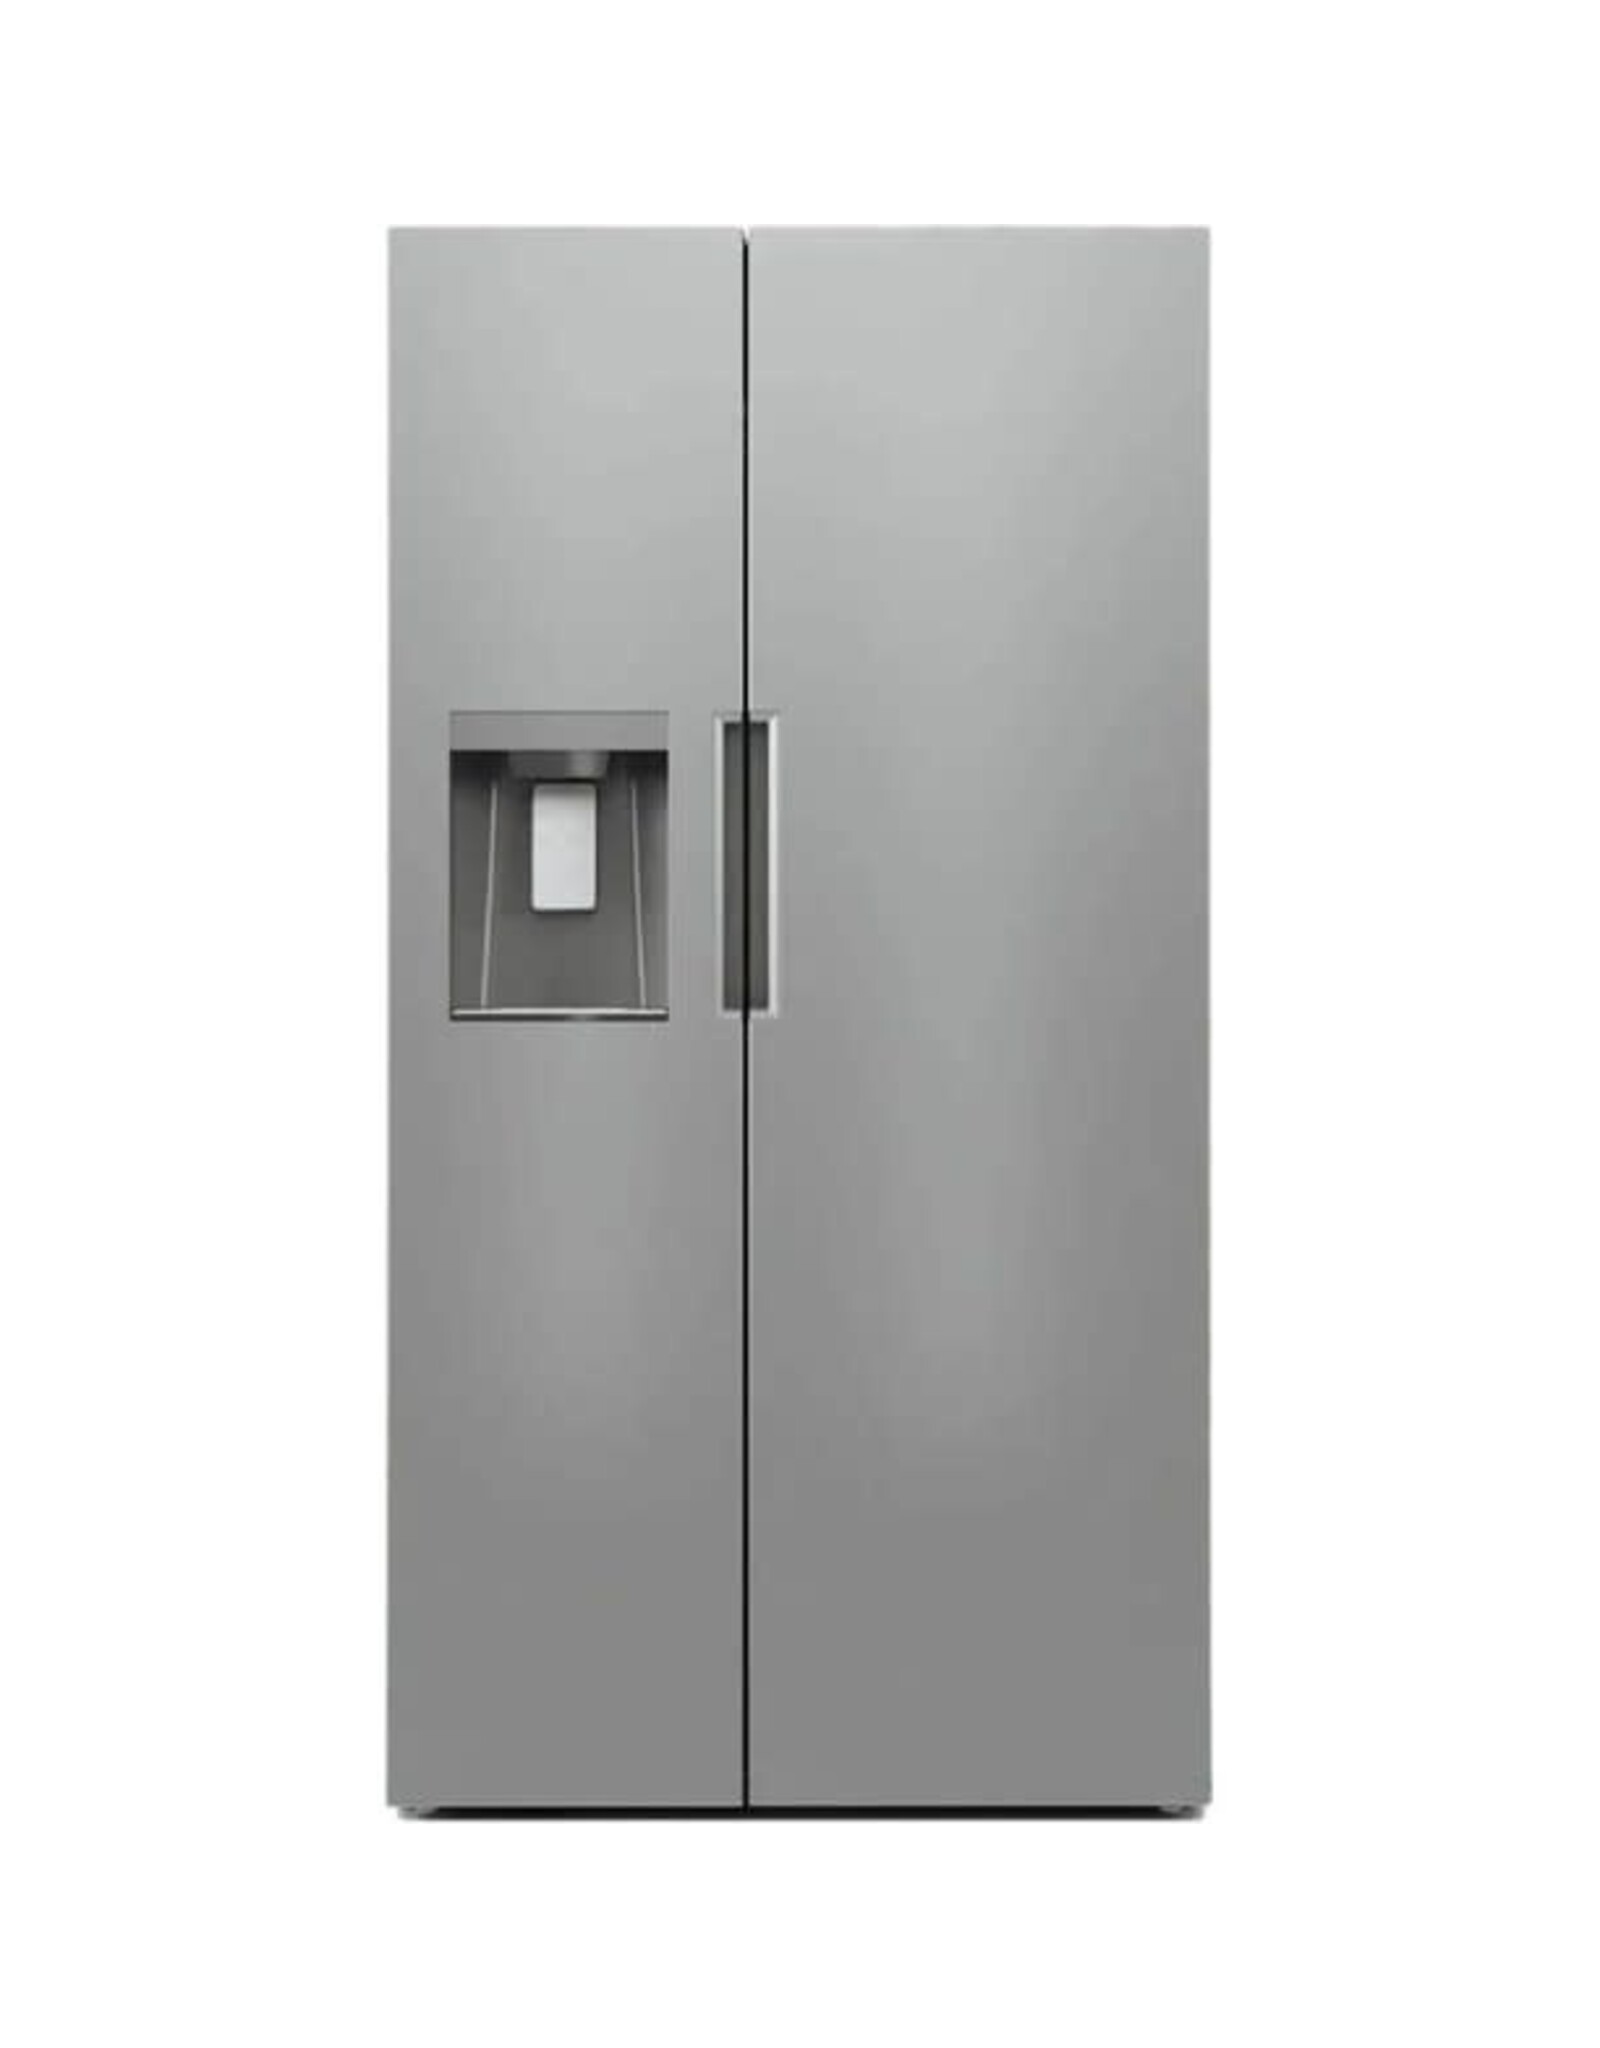 MRS26D5AST  Midea  26.3-cu ft Side-by-Side Refrigerator with Ice Maker (Stainless Steel)